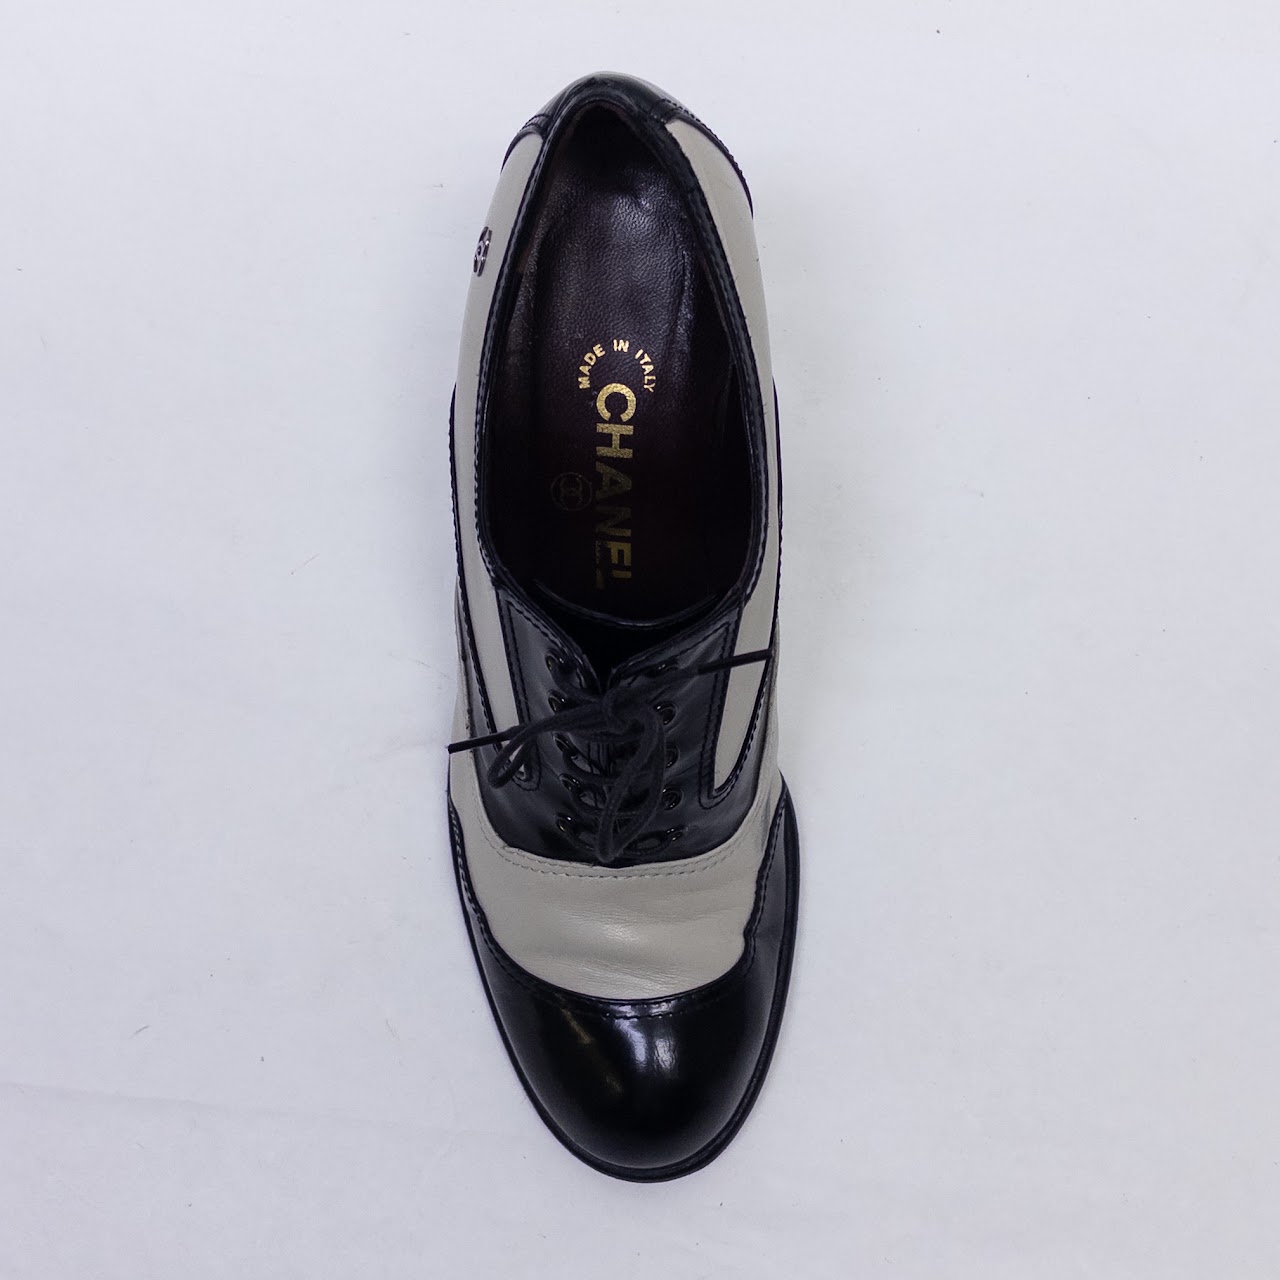 Chanel Leather Oxford Pumps